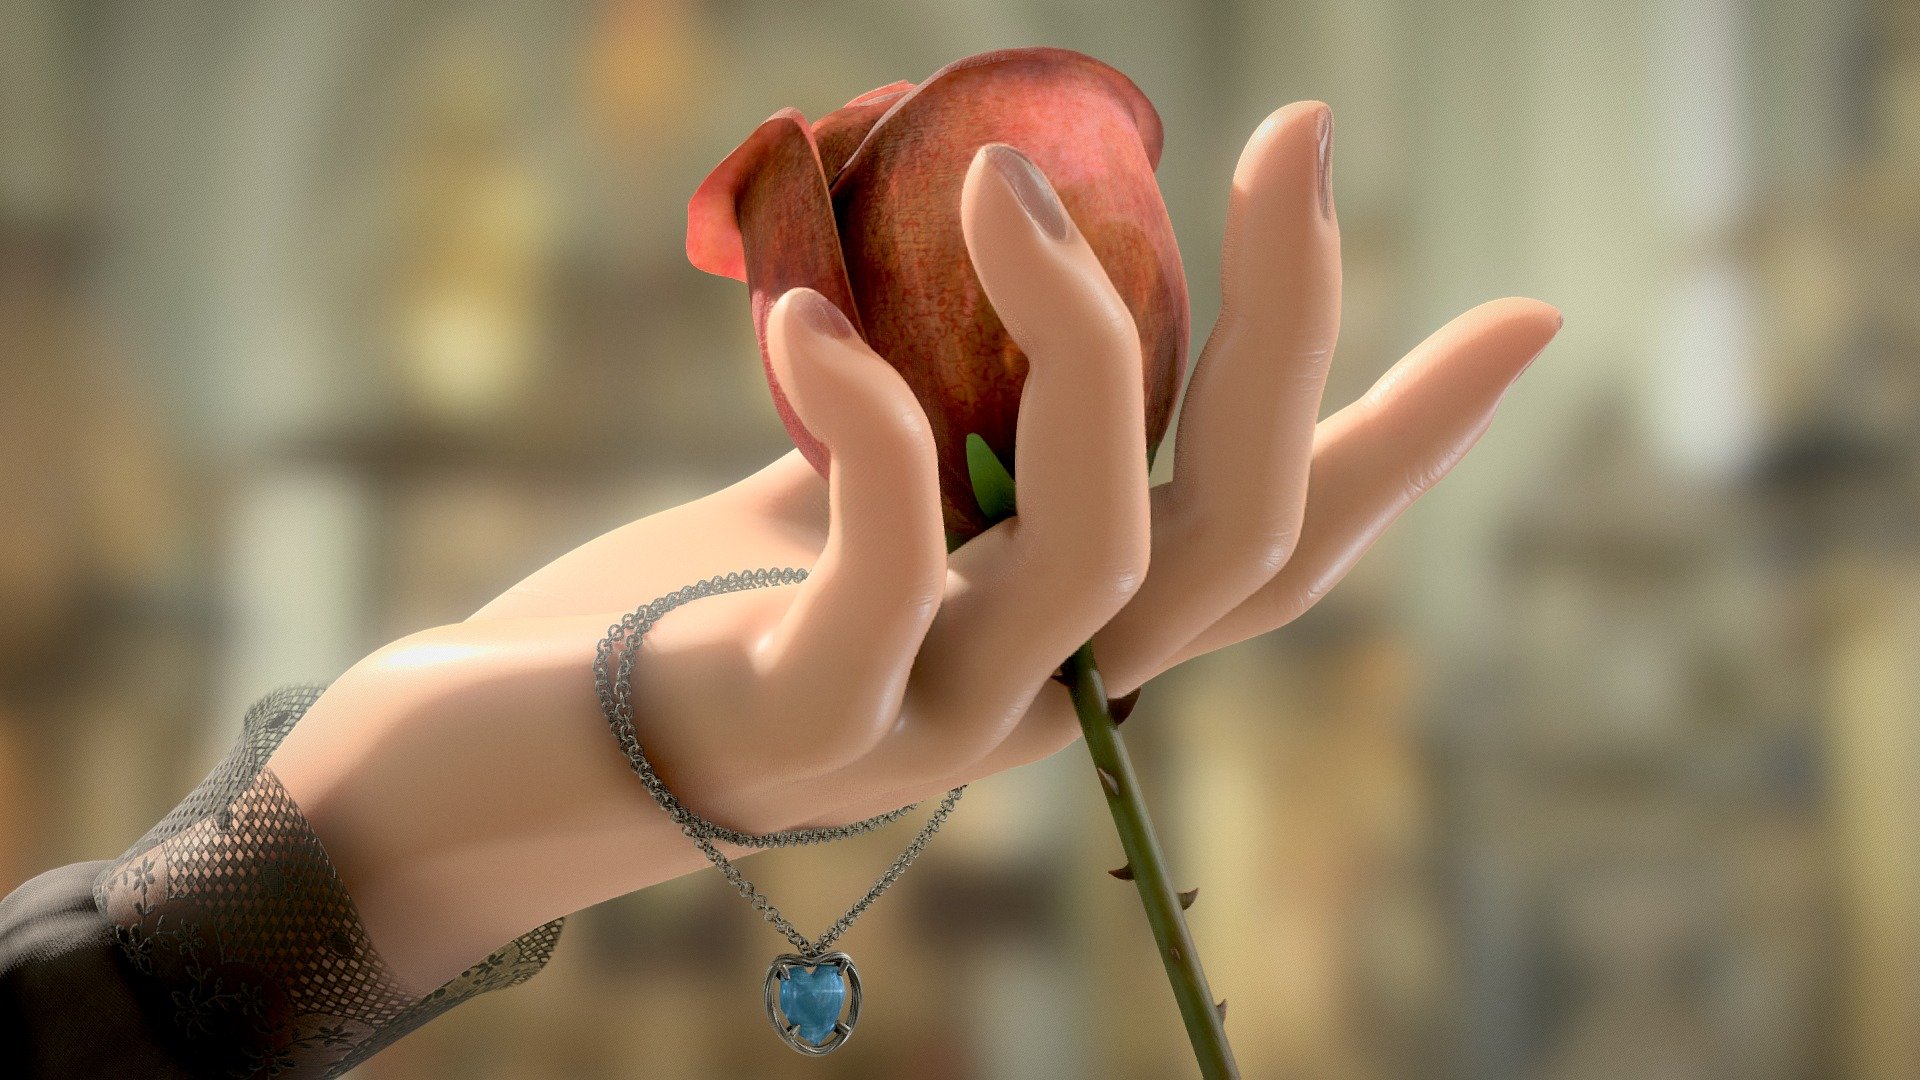 A one-day project. I've had this idea for a mournful hand clasping a rose for a while, but it never felt complete. Adding the pendant and chain I felt really added the needed story to really bring the piece together. 

Hand model was from MakeHuman, all else I modelled in Blender. Textures were done in Substance Painter, then brought back into Blender 2.79 for rendering using the Principled BSDF for most surfaces, except the topaz crystal heart, which was done with my own custom absorption glass shader.

Full artwork on ArtStation here.

 - The Rose - 3D model by Blackhart 3d model